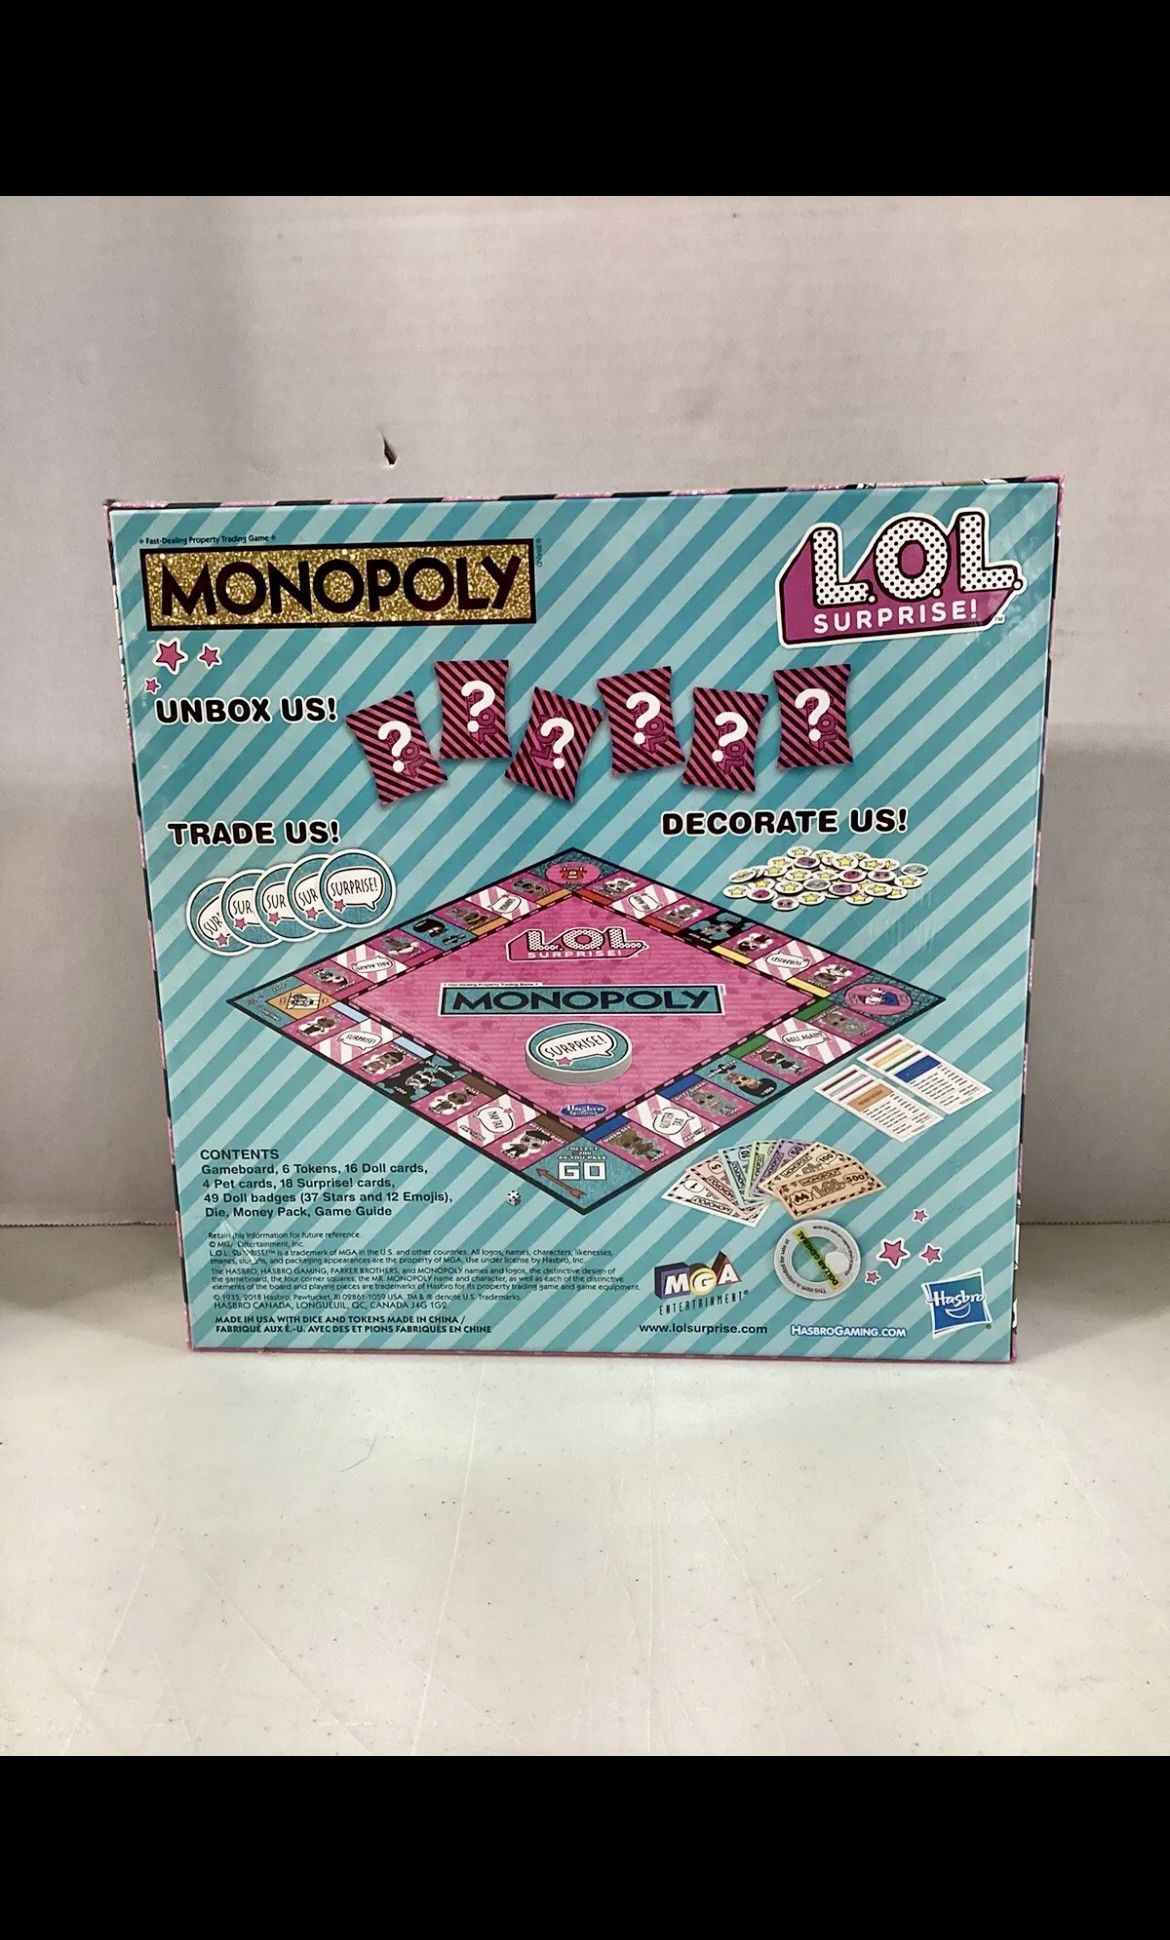 LOL SURPRISE  Monopoly Board Game New in Sealed Box by Hasbro Gaming New 